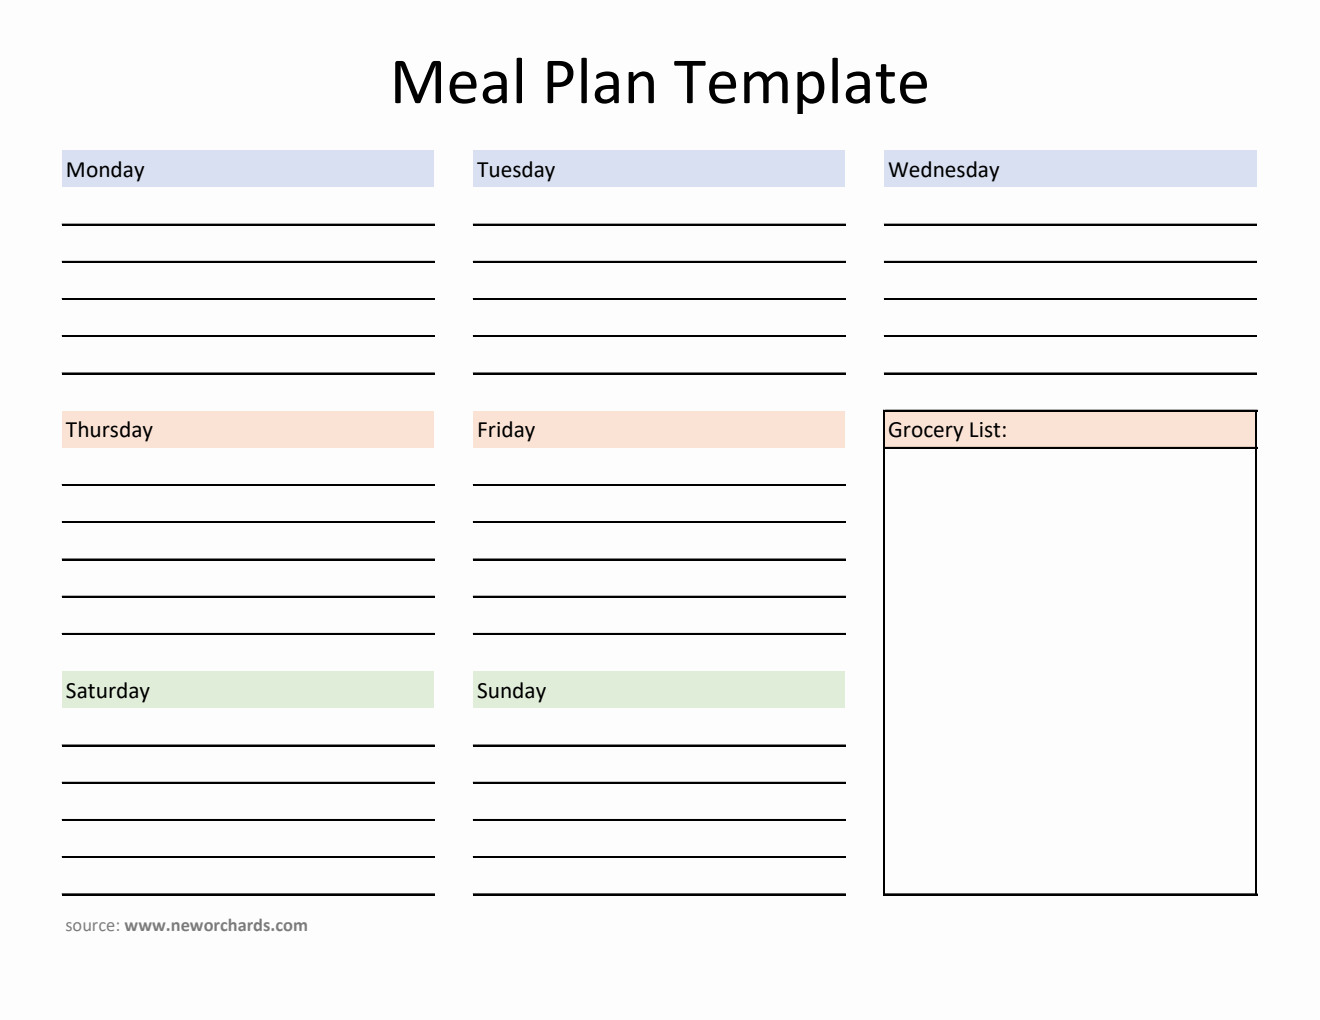 Editable Meal Plan Template in Excel